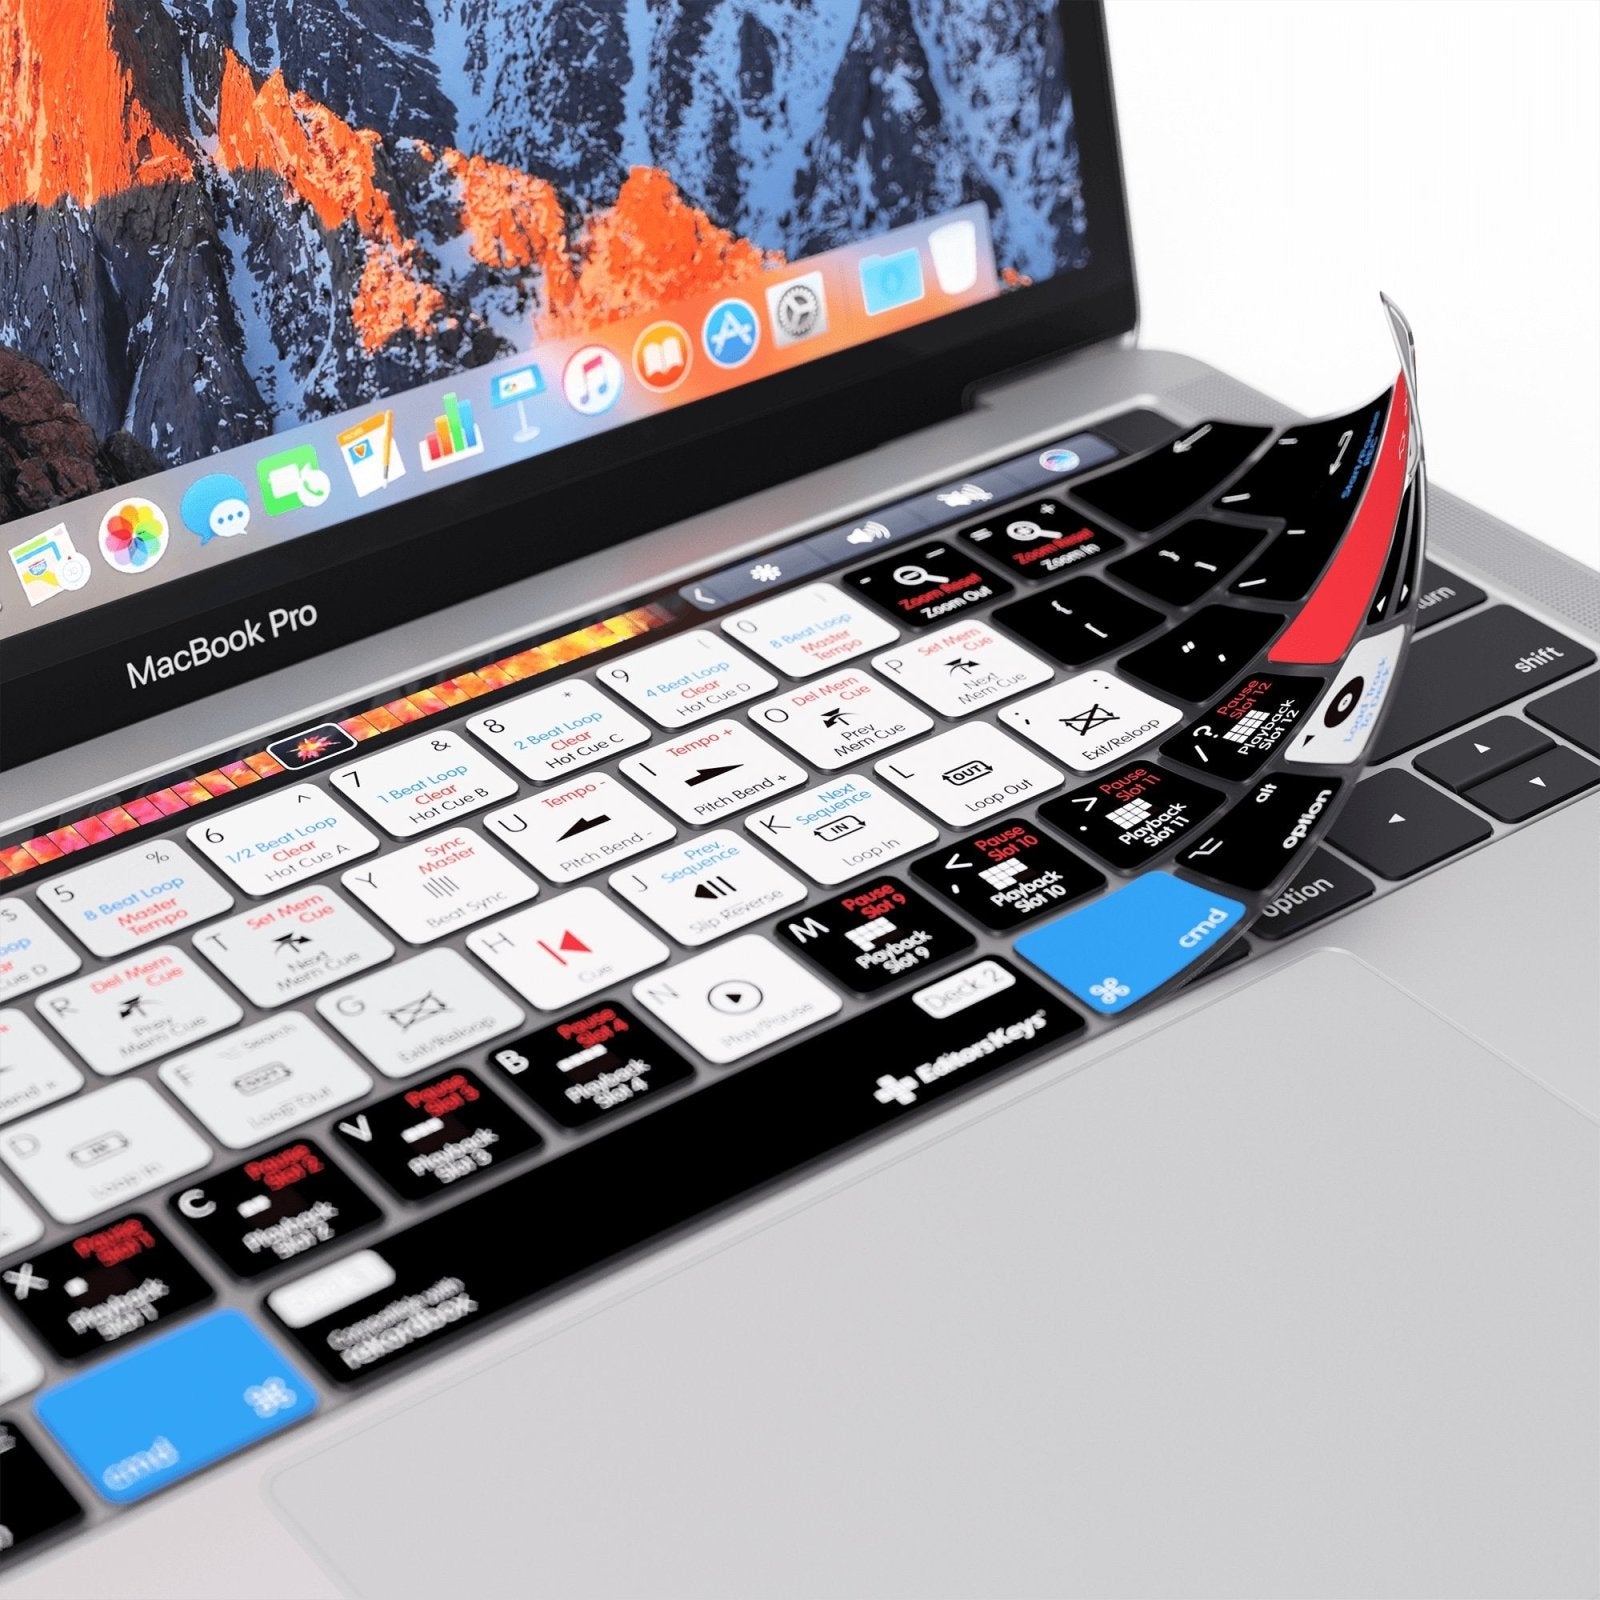 New Rekordbox Keyboard Shortcut Covers | Out now for MacBook Pro - Editors Keys